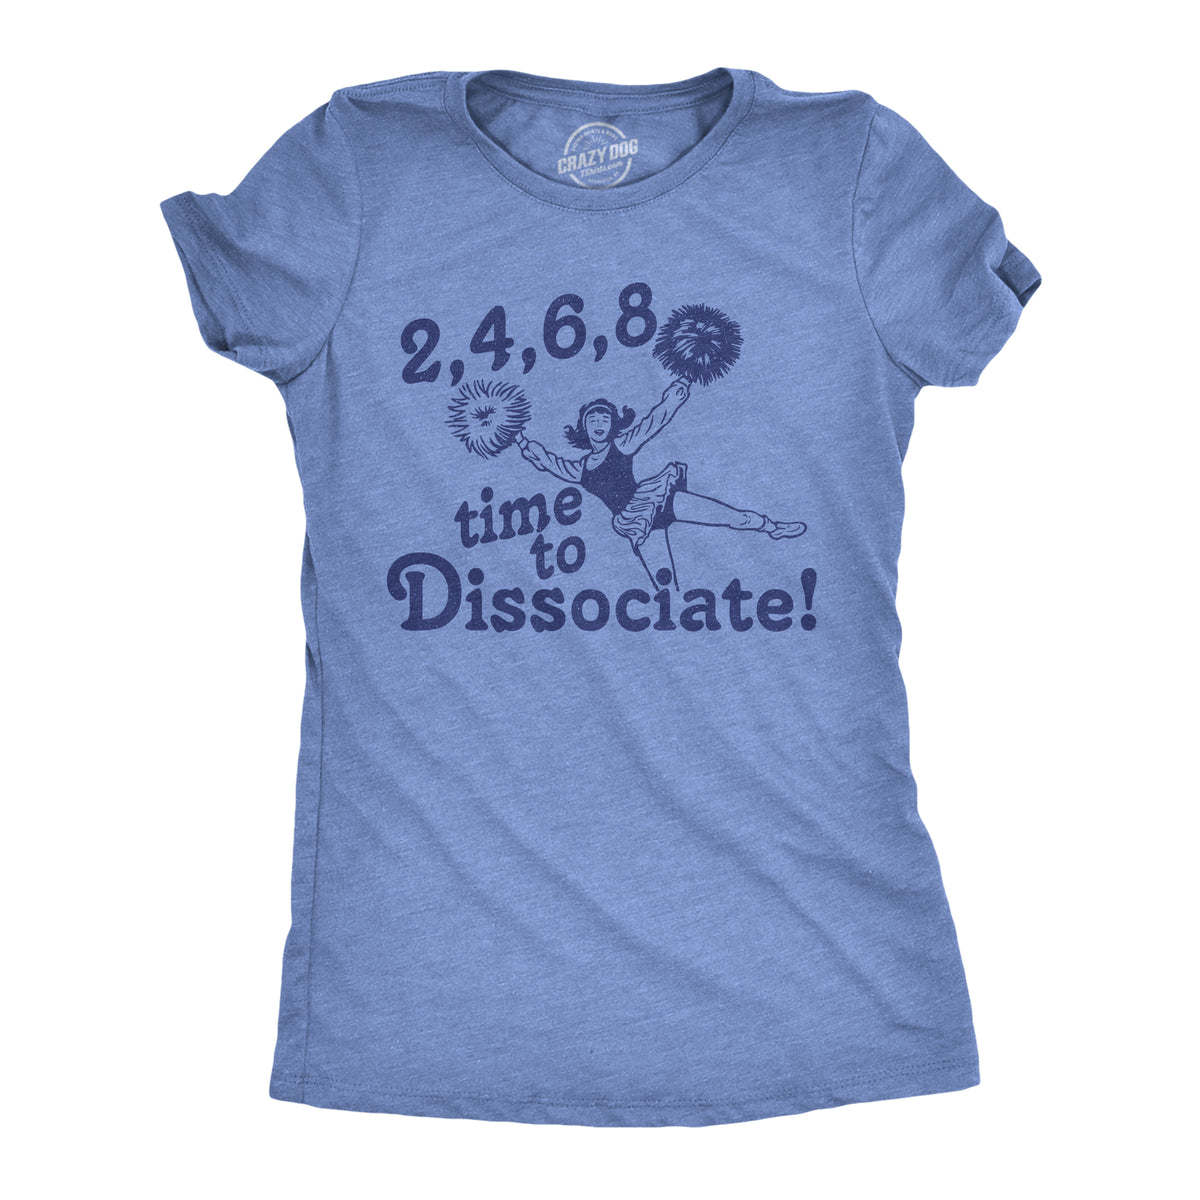 Funny Light Heather Blue - Time To Dissociate 2 4 6 8 Time To Dissociate Womens T Shirt Nerdy Sarcastic Introvert Tee